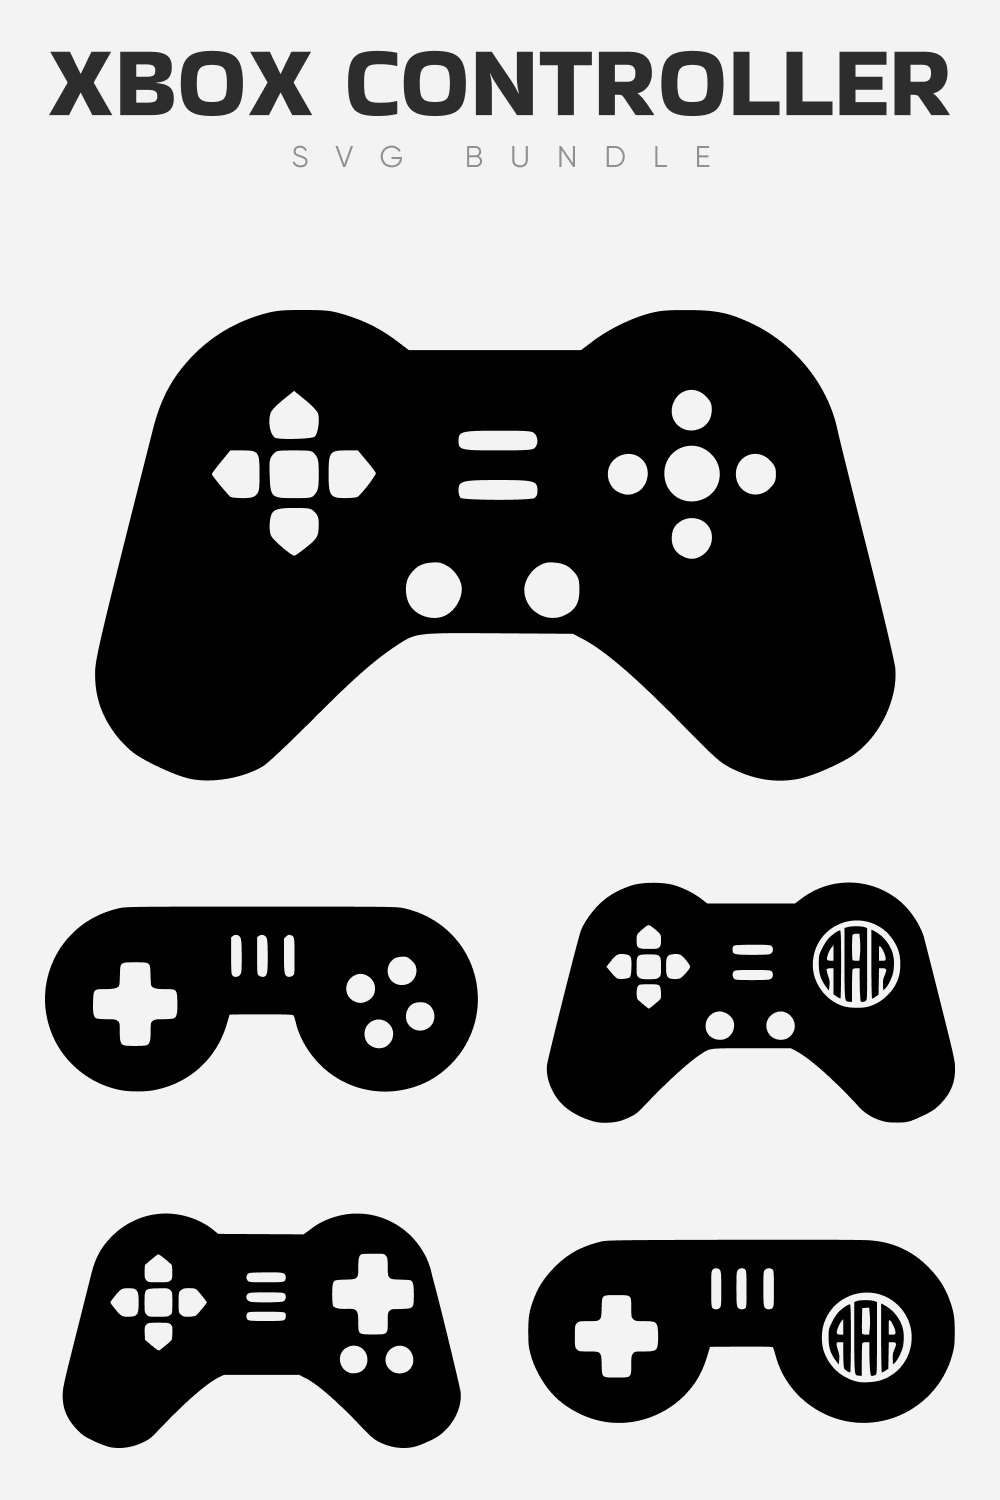 One Big and Four Small Xbox Controller SVG Bundle.